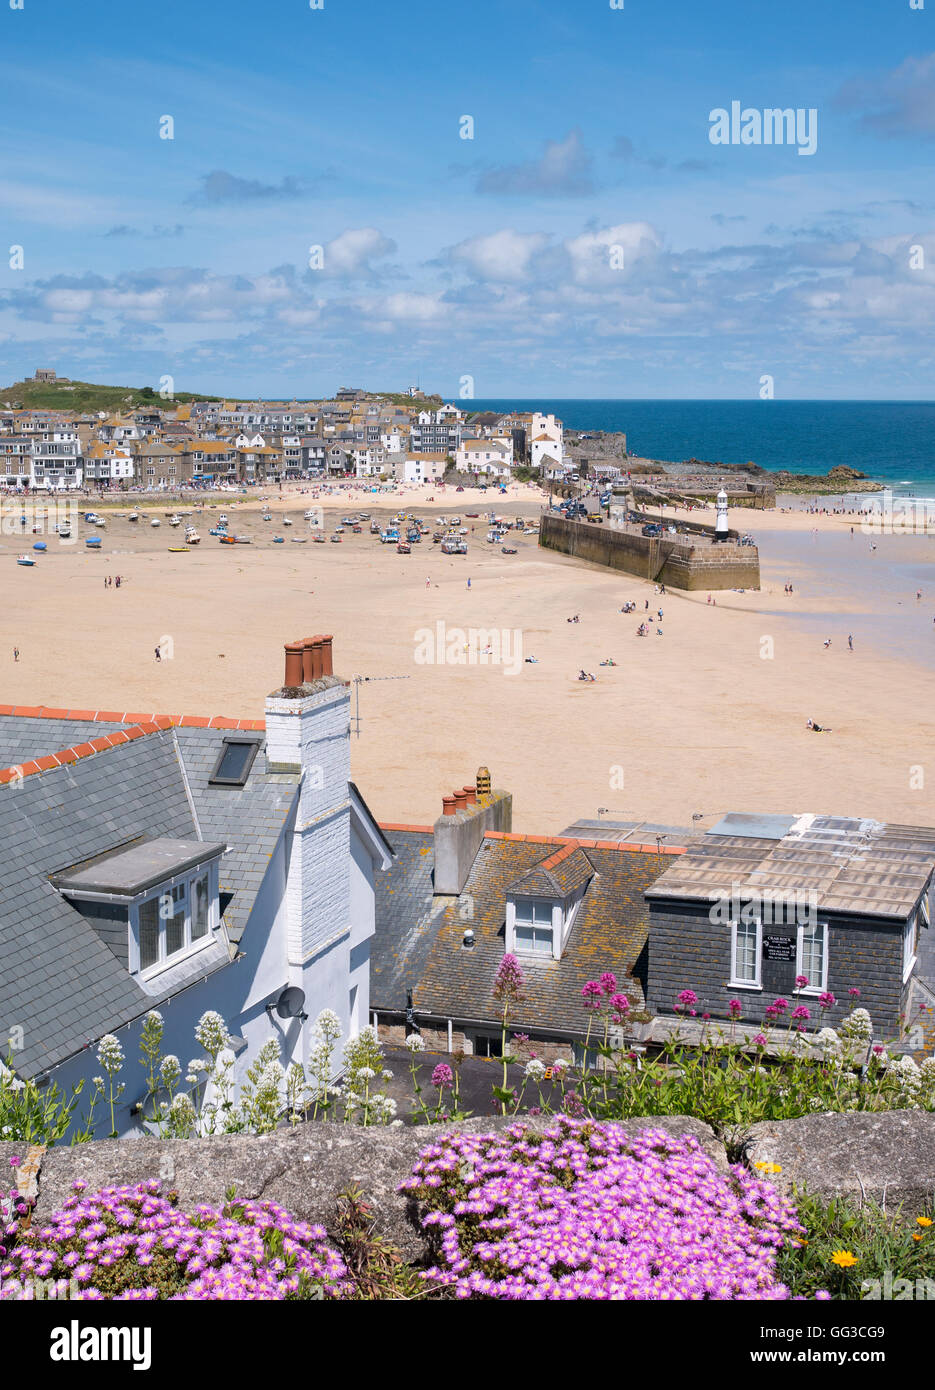 St. Ives harbour beach from above, Cornwall England. Stock Photo